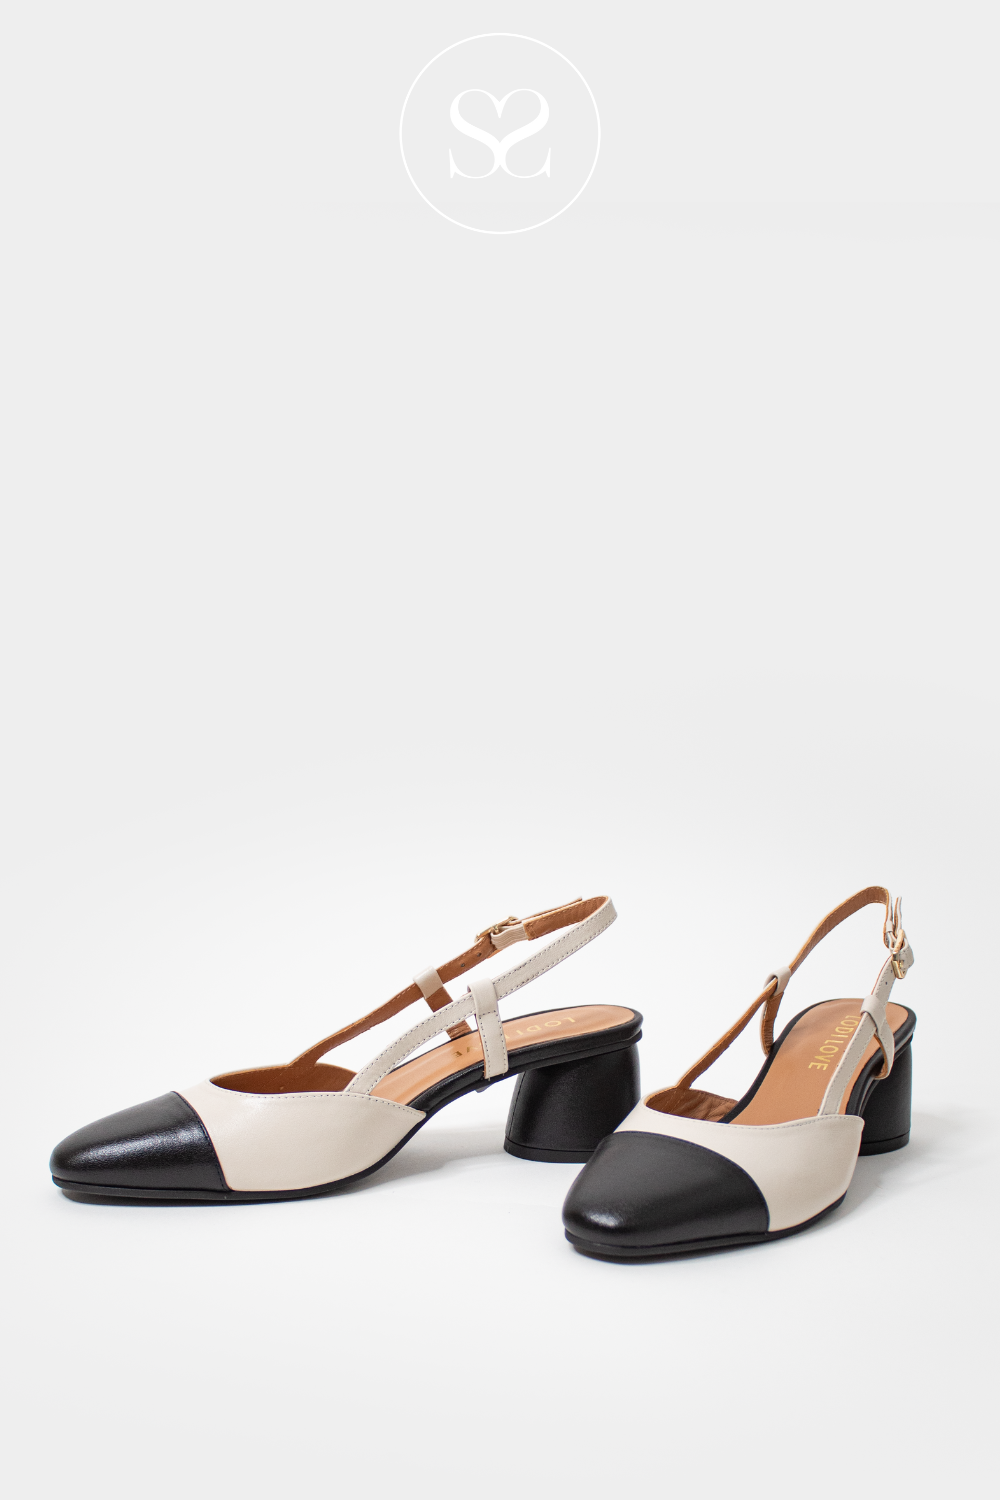 lodi heels with black and cream detailing, sling back design with low block heel